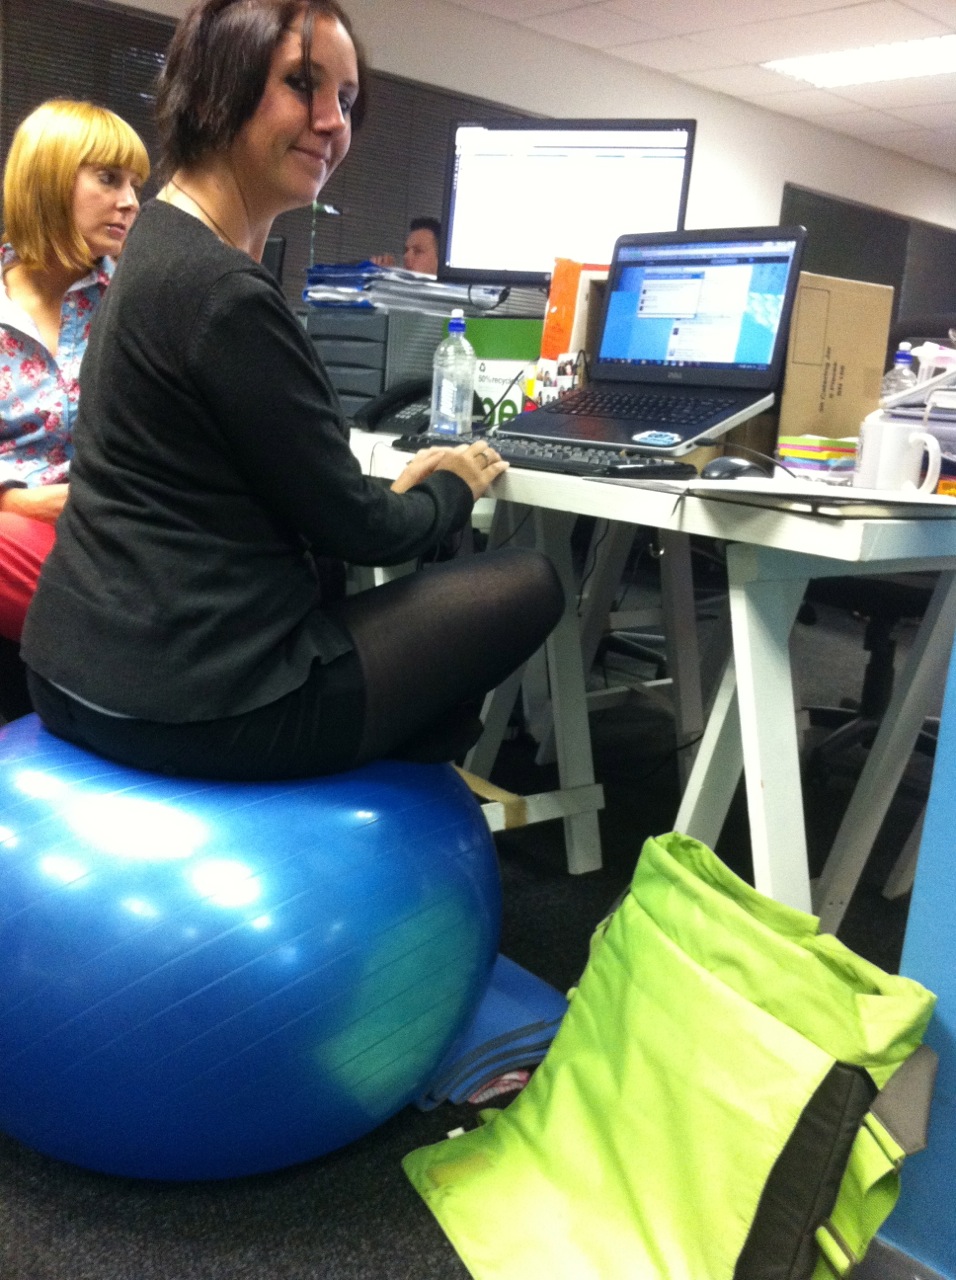 sitting on yoga ball in office